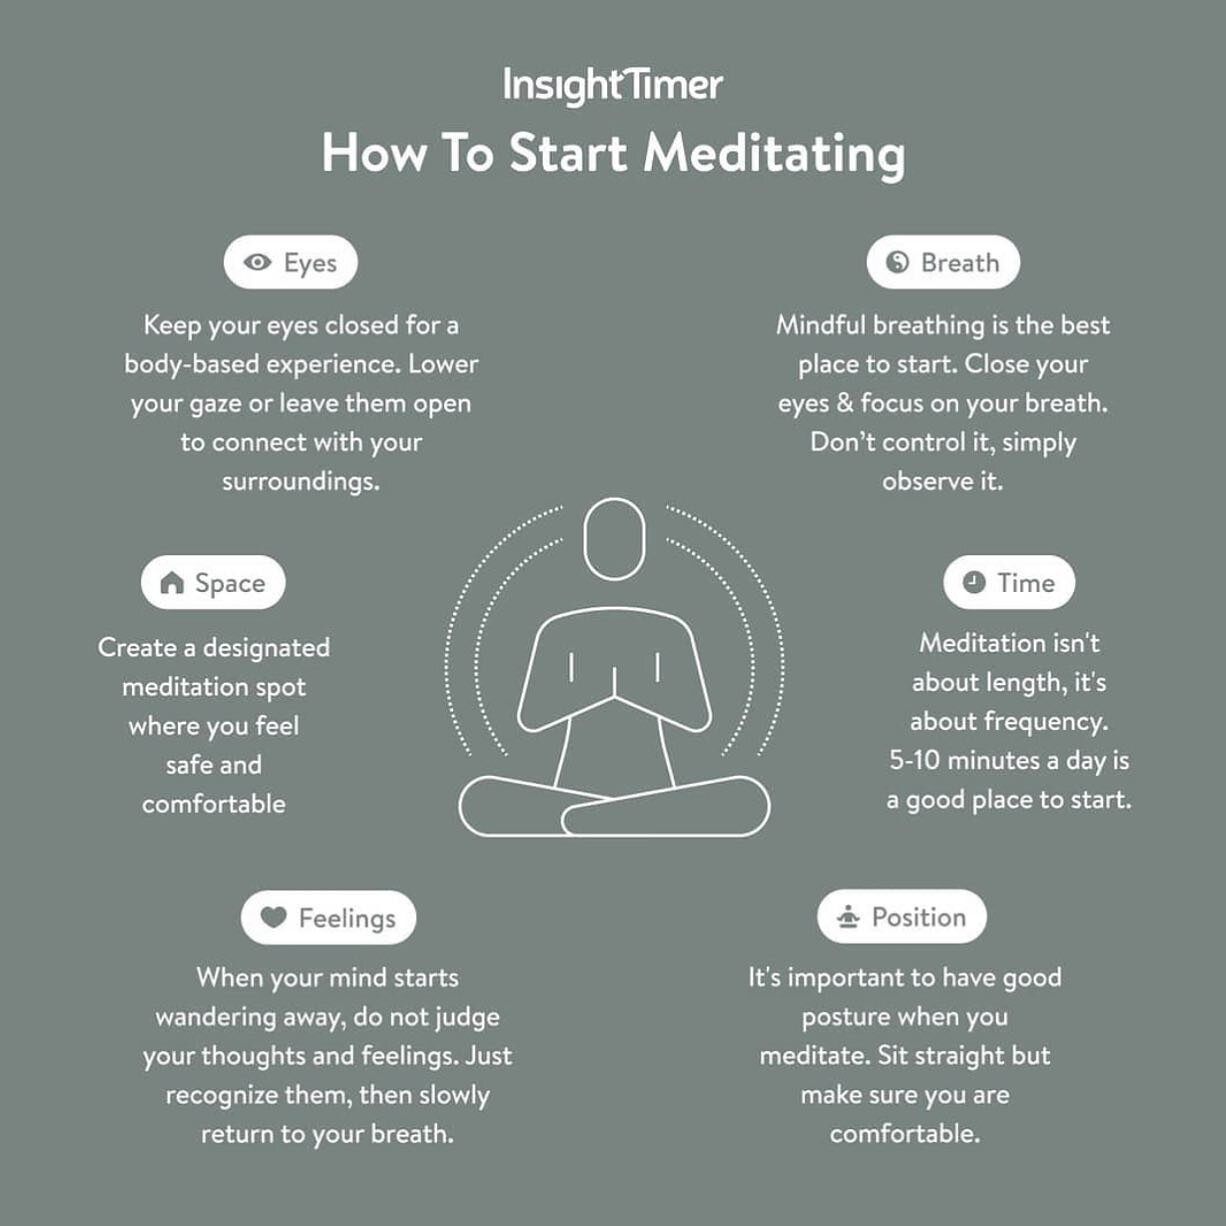 Ever thought of trying meditation?
Here&rsquo;s a simple little guide. 

Using meditation apps like @insighttimer can also help 🧘🏻&zwj;♀️ 

#insighttimer #insightacademy #meditation #meditationpractice #meditationtools #meditationforbeginners #guid